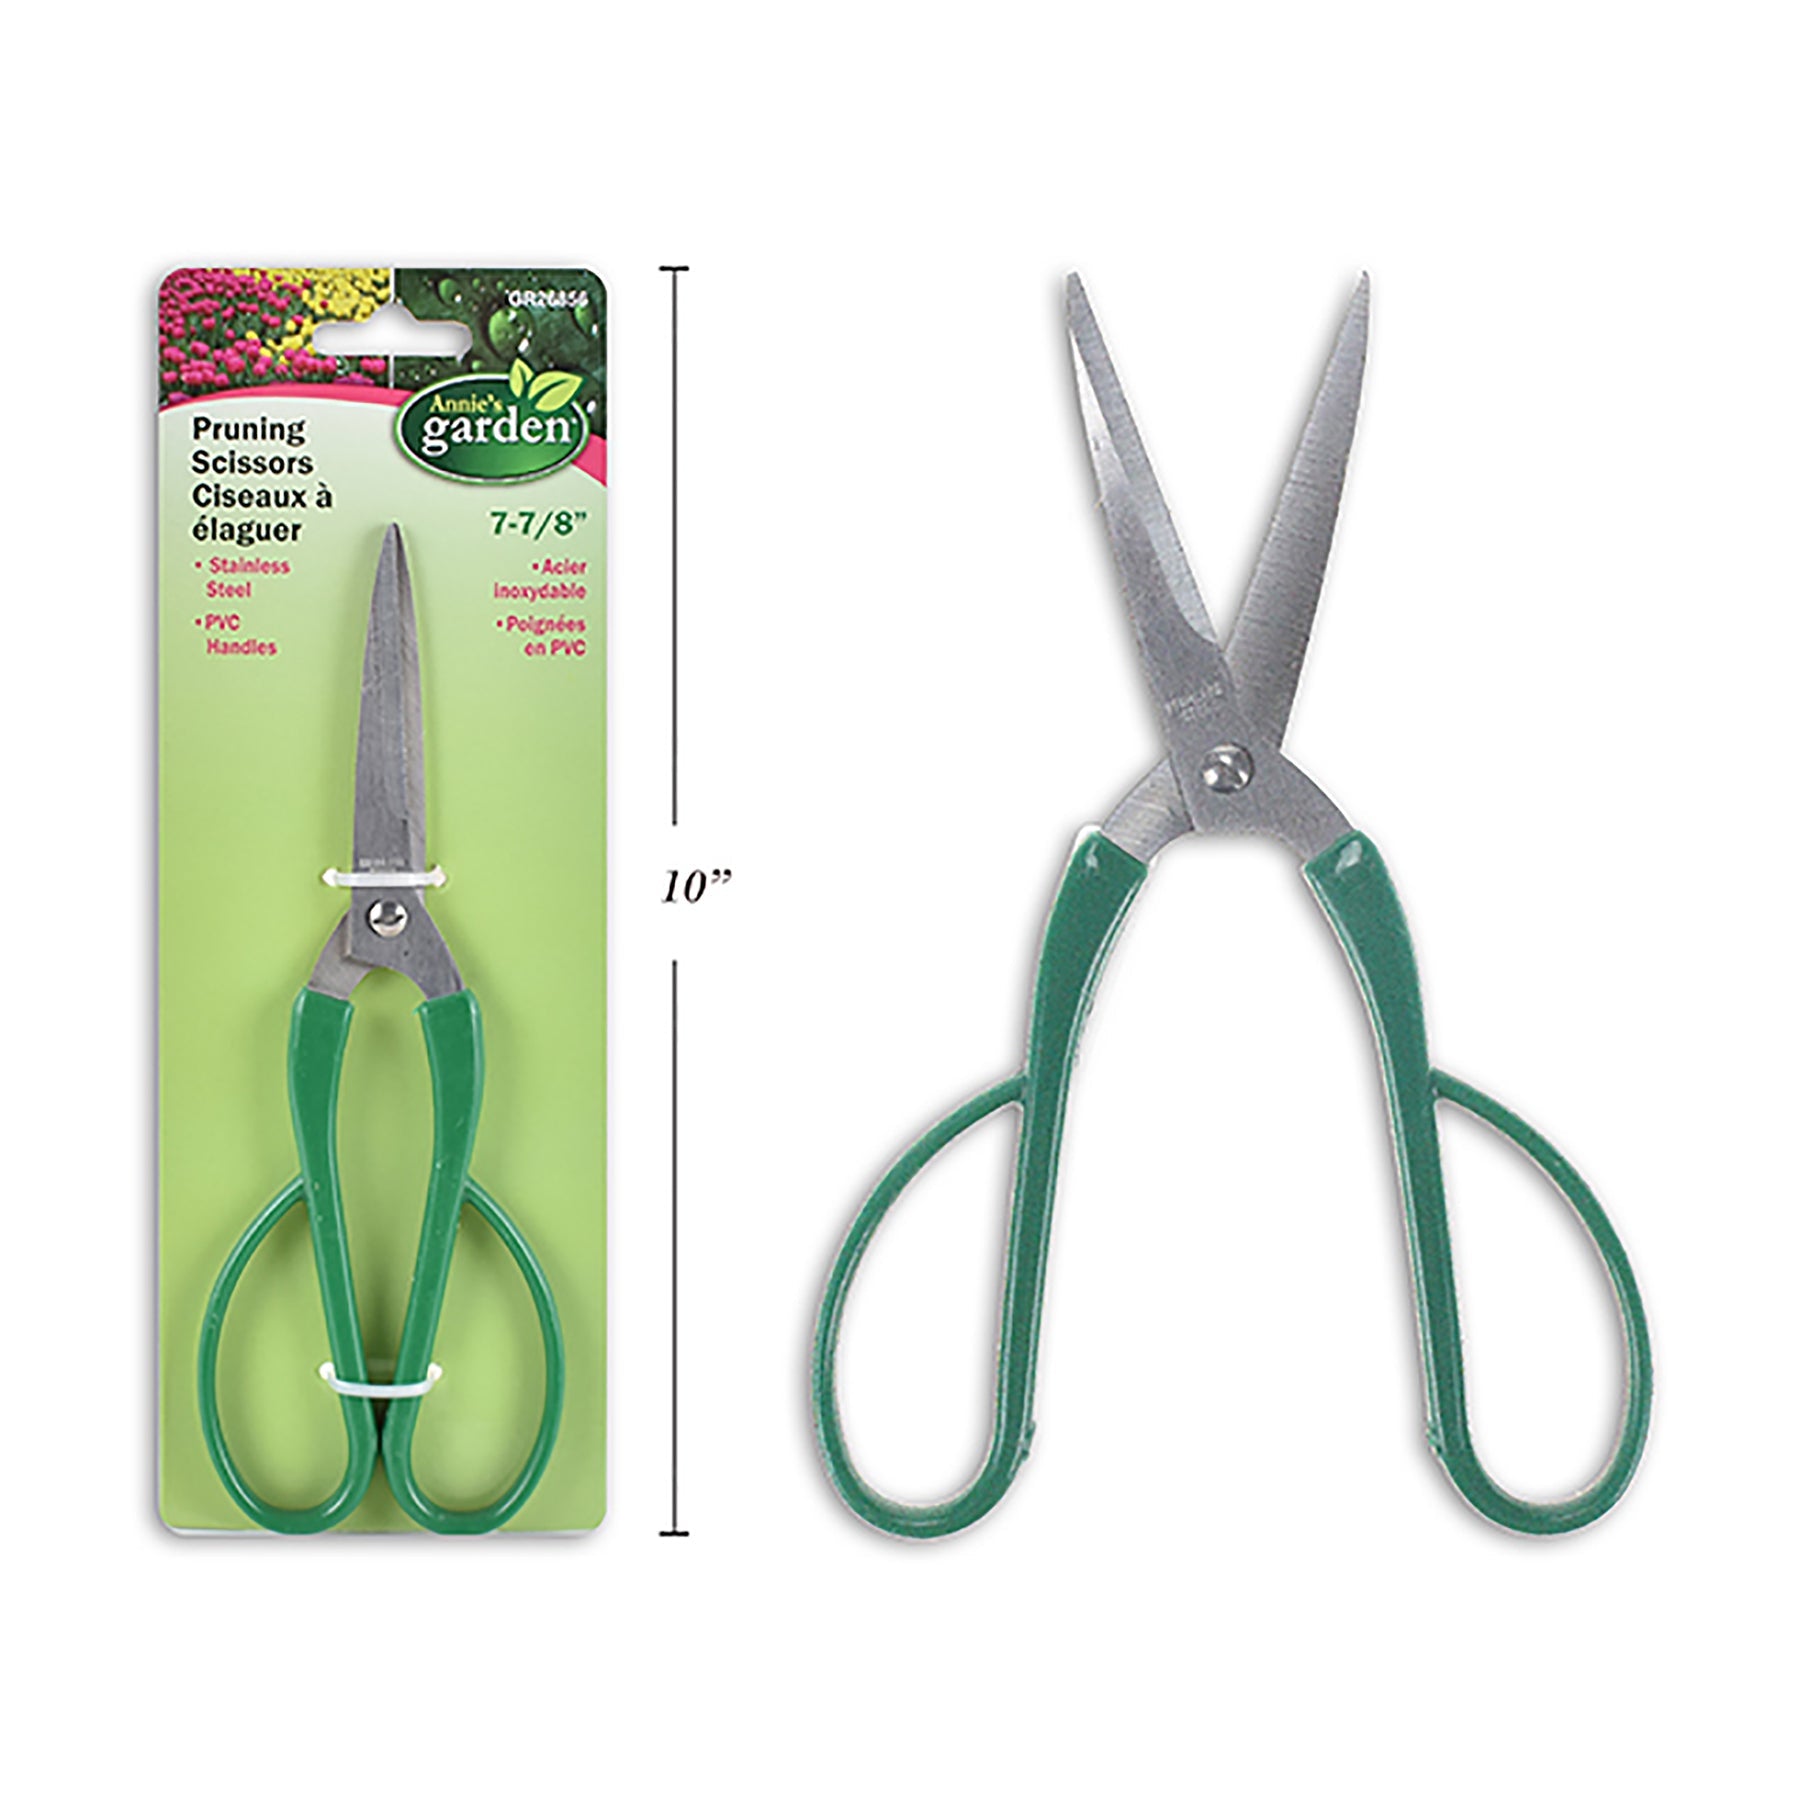 Annie's Garden Stainless Steel Needle Nose Pruning Scissors with Plastic Handles 7.87in